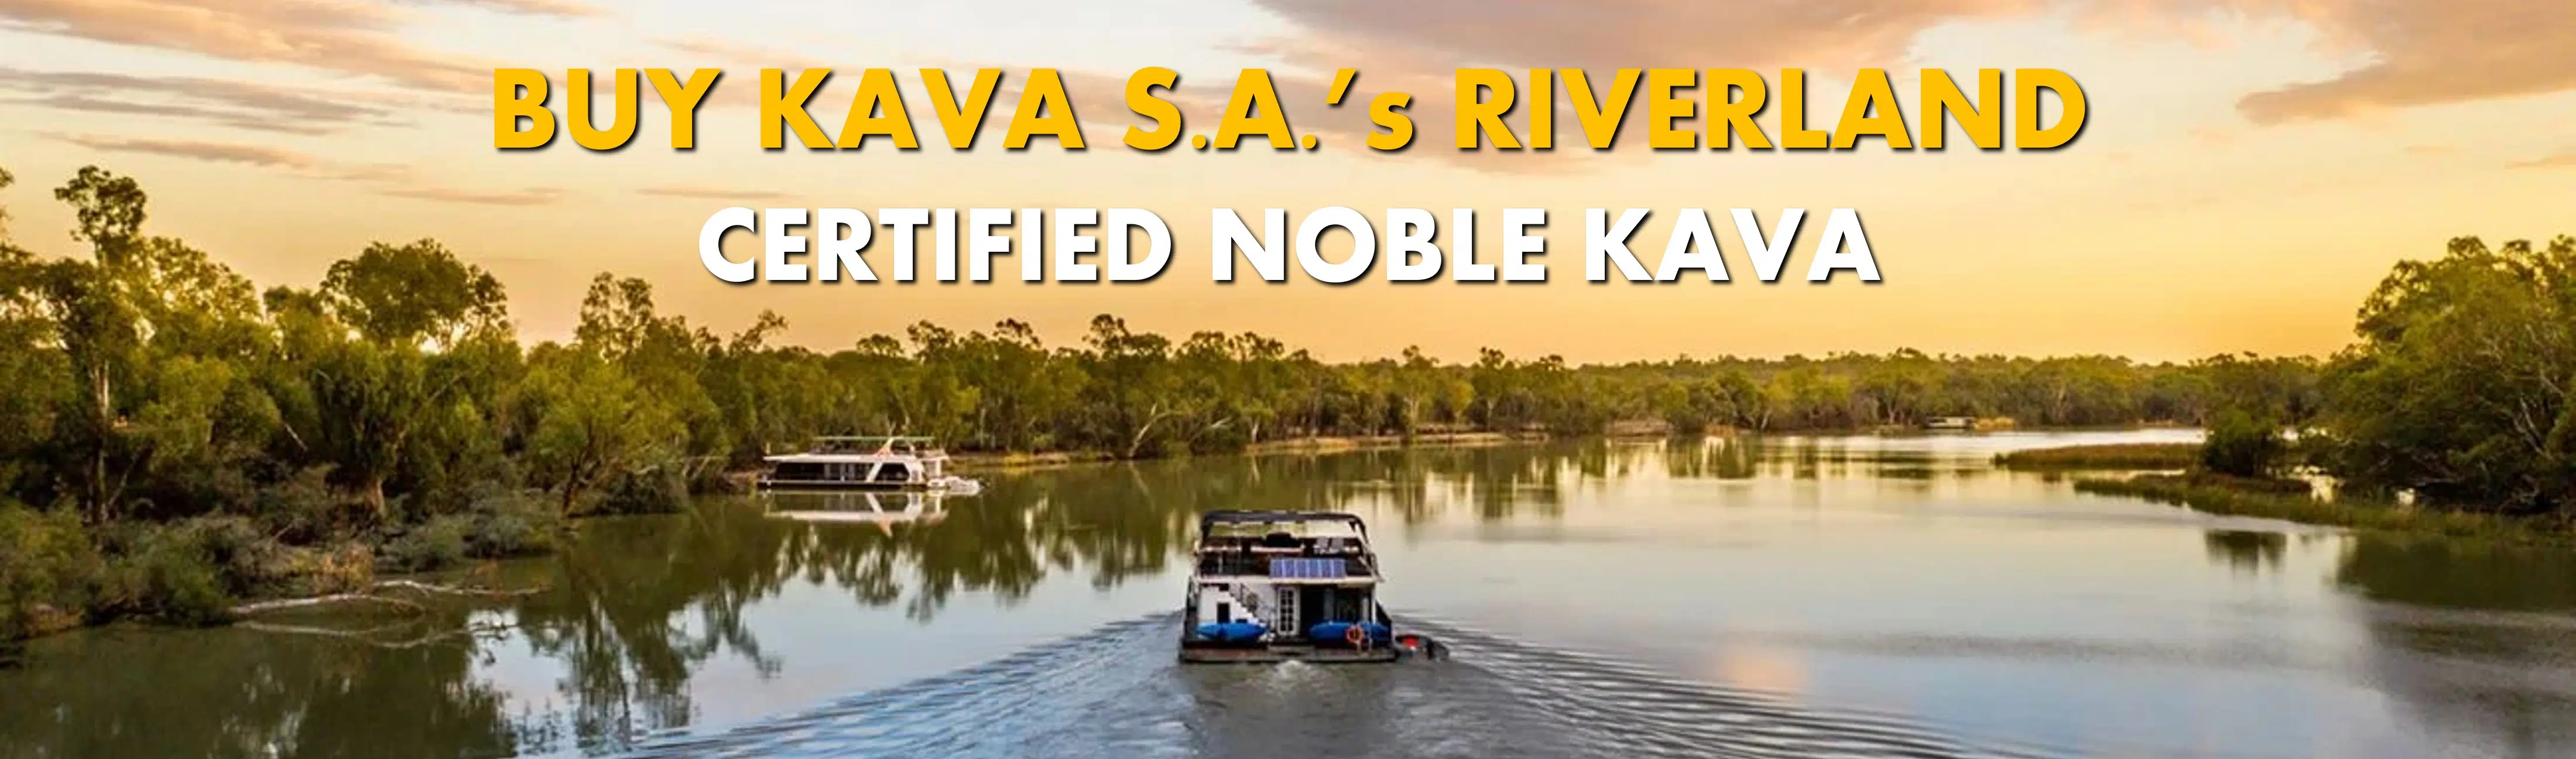 Boat at dusk on Murray River near Paringa, Riverland, South Australia with caption Buy Kava S.A.'s Riverland Certified Noble Kava